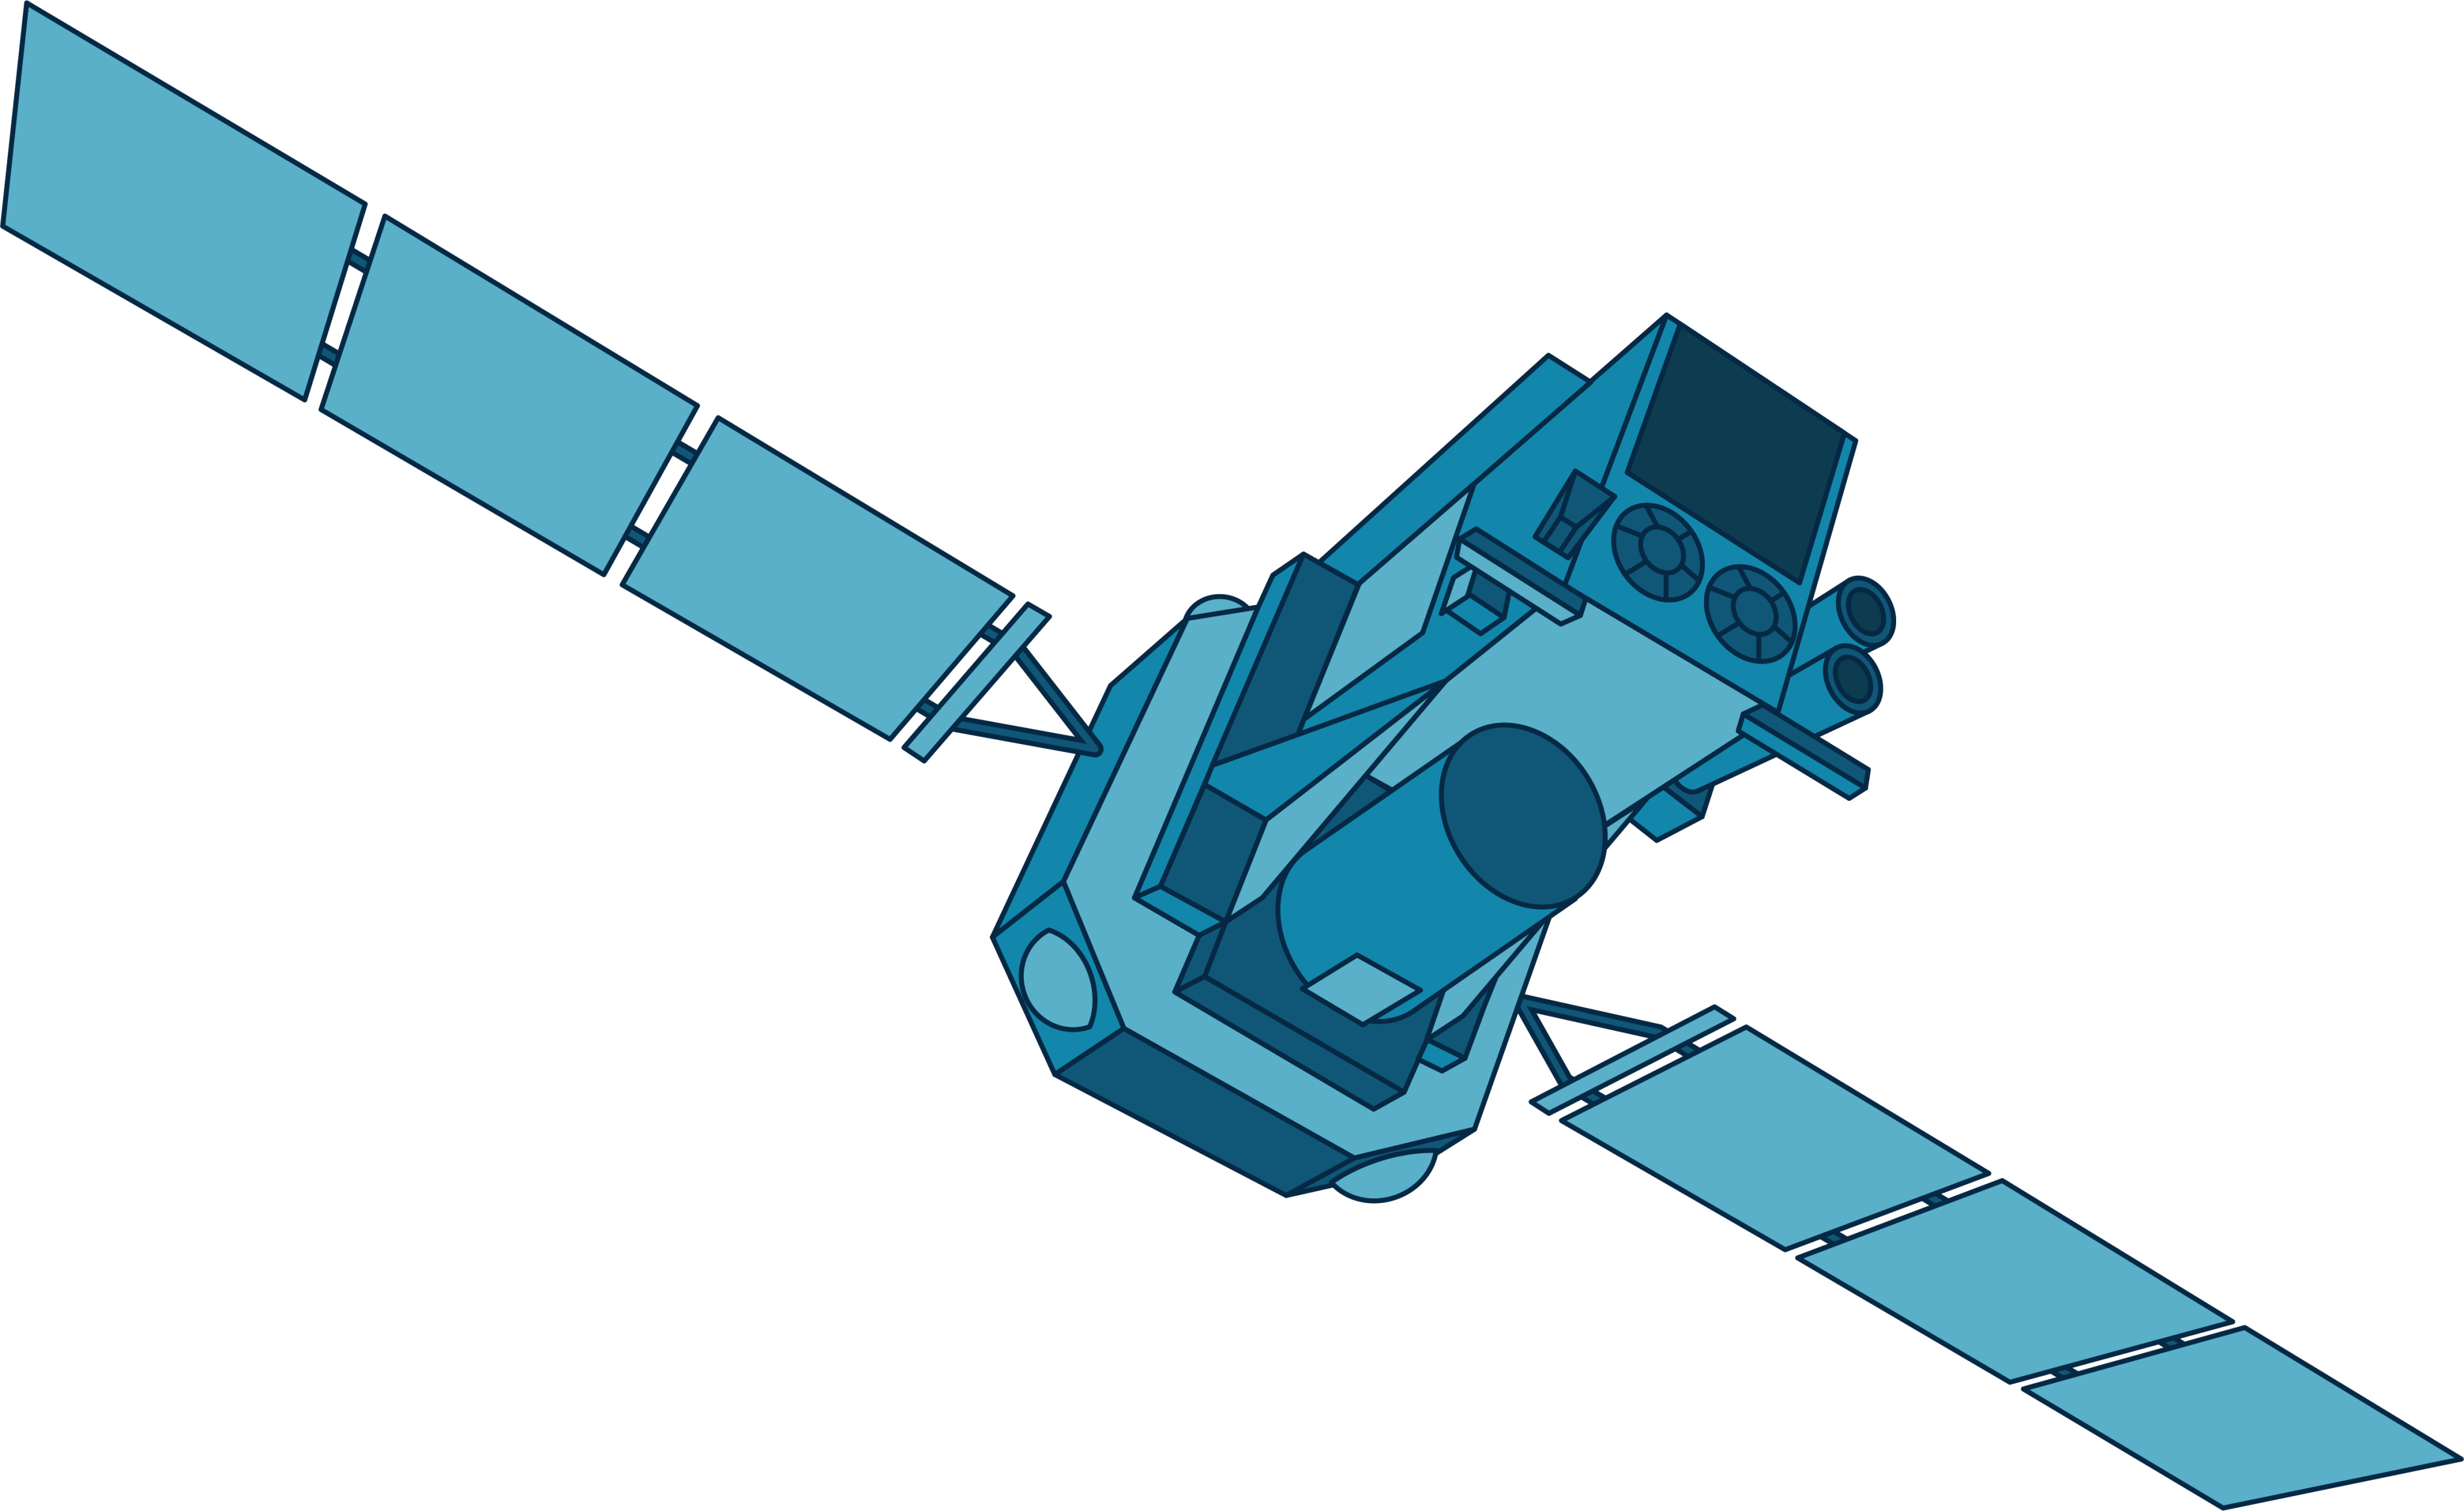 This INTEGRAL illustration shows the space telescope in shades of blue. The main body of the spacecraft is made of an octagonal base. A long rectangle extends from the base above a cylinder. Solar panels extend from either side of the base.